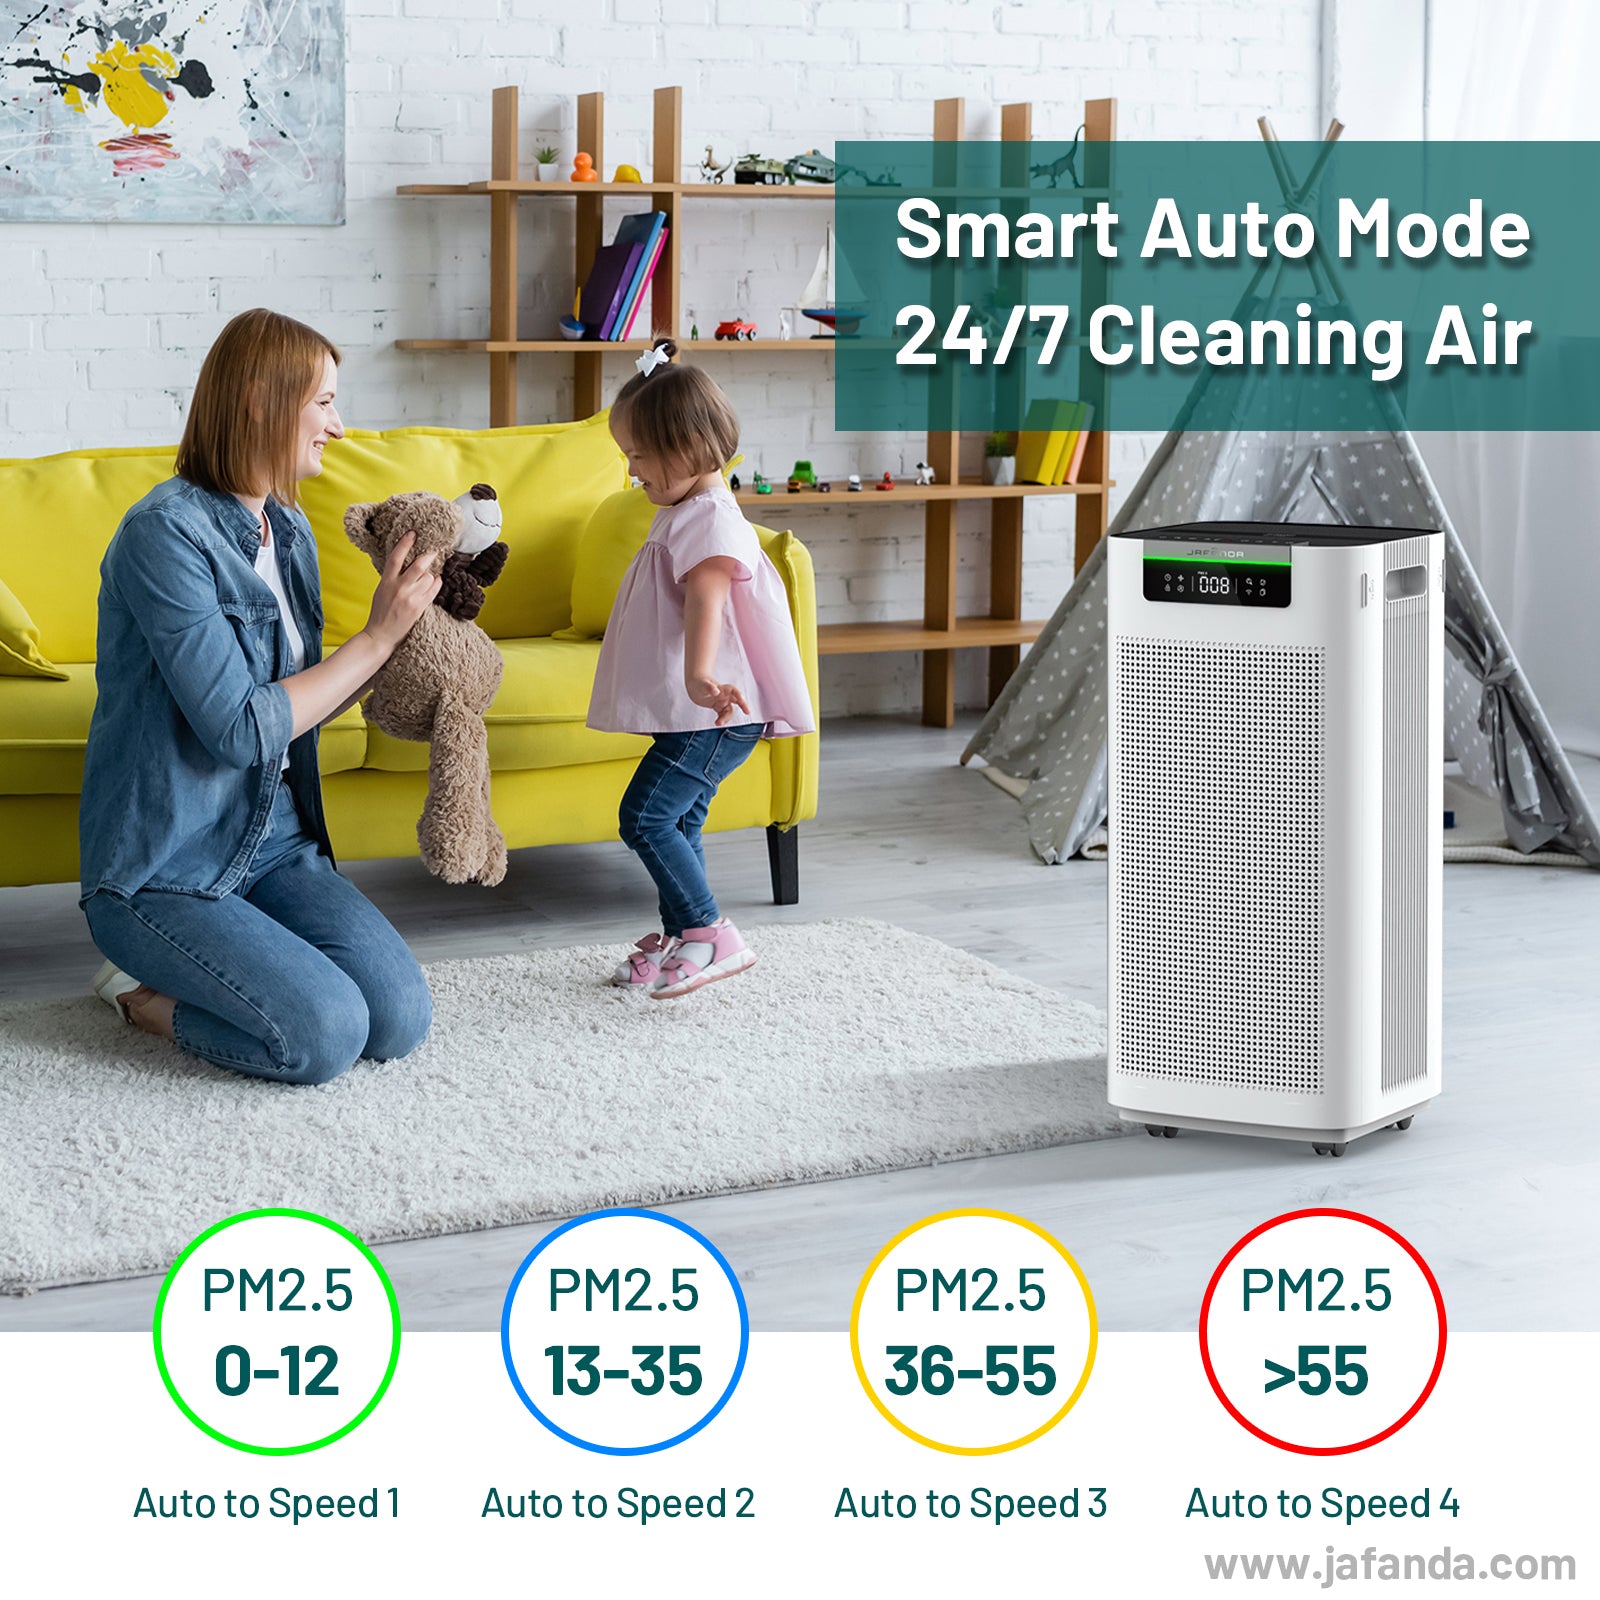 Infected with COVID-19 and encountered wildfire smoke: What kind of protection can air purifiers provide?